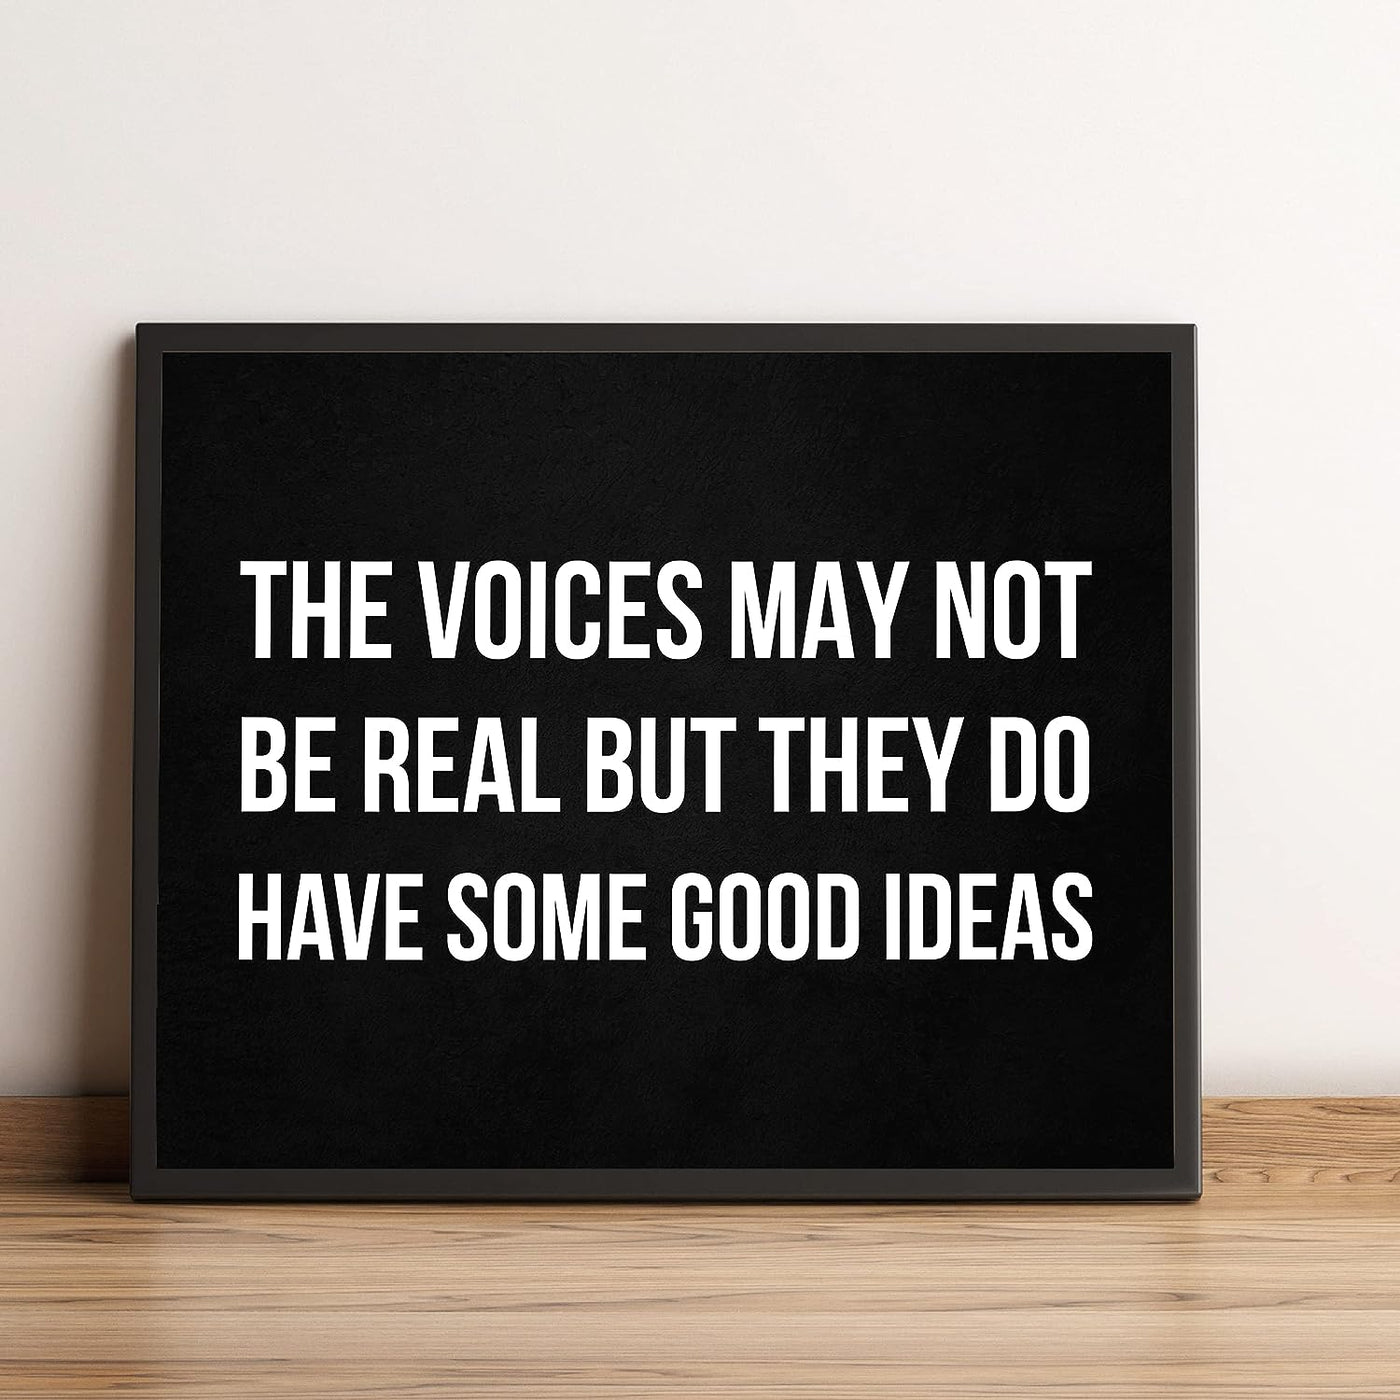 The Voices May Not Be Real-They Have Some Good Ideas Funny Wall Sign -10 x 8" Sarcastic Art Print-Ready to Frame. Humorous Decor for Home-Office-Bar-Shop-Man Cave. Great Desk Sign-Fun Novelty Gift!